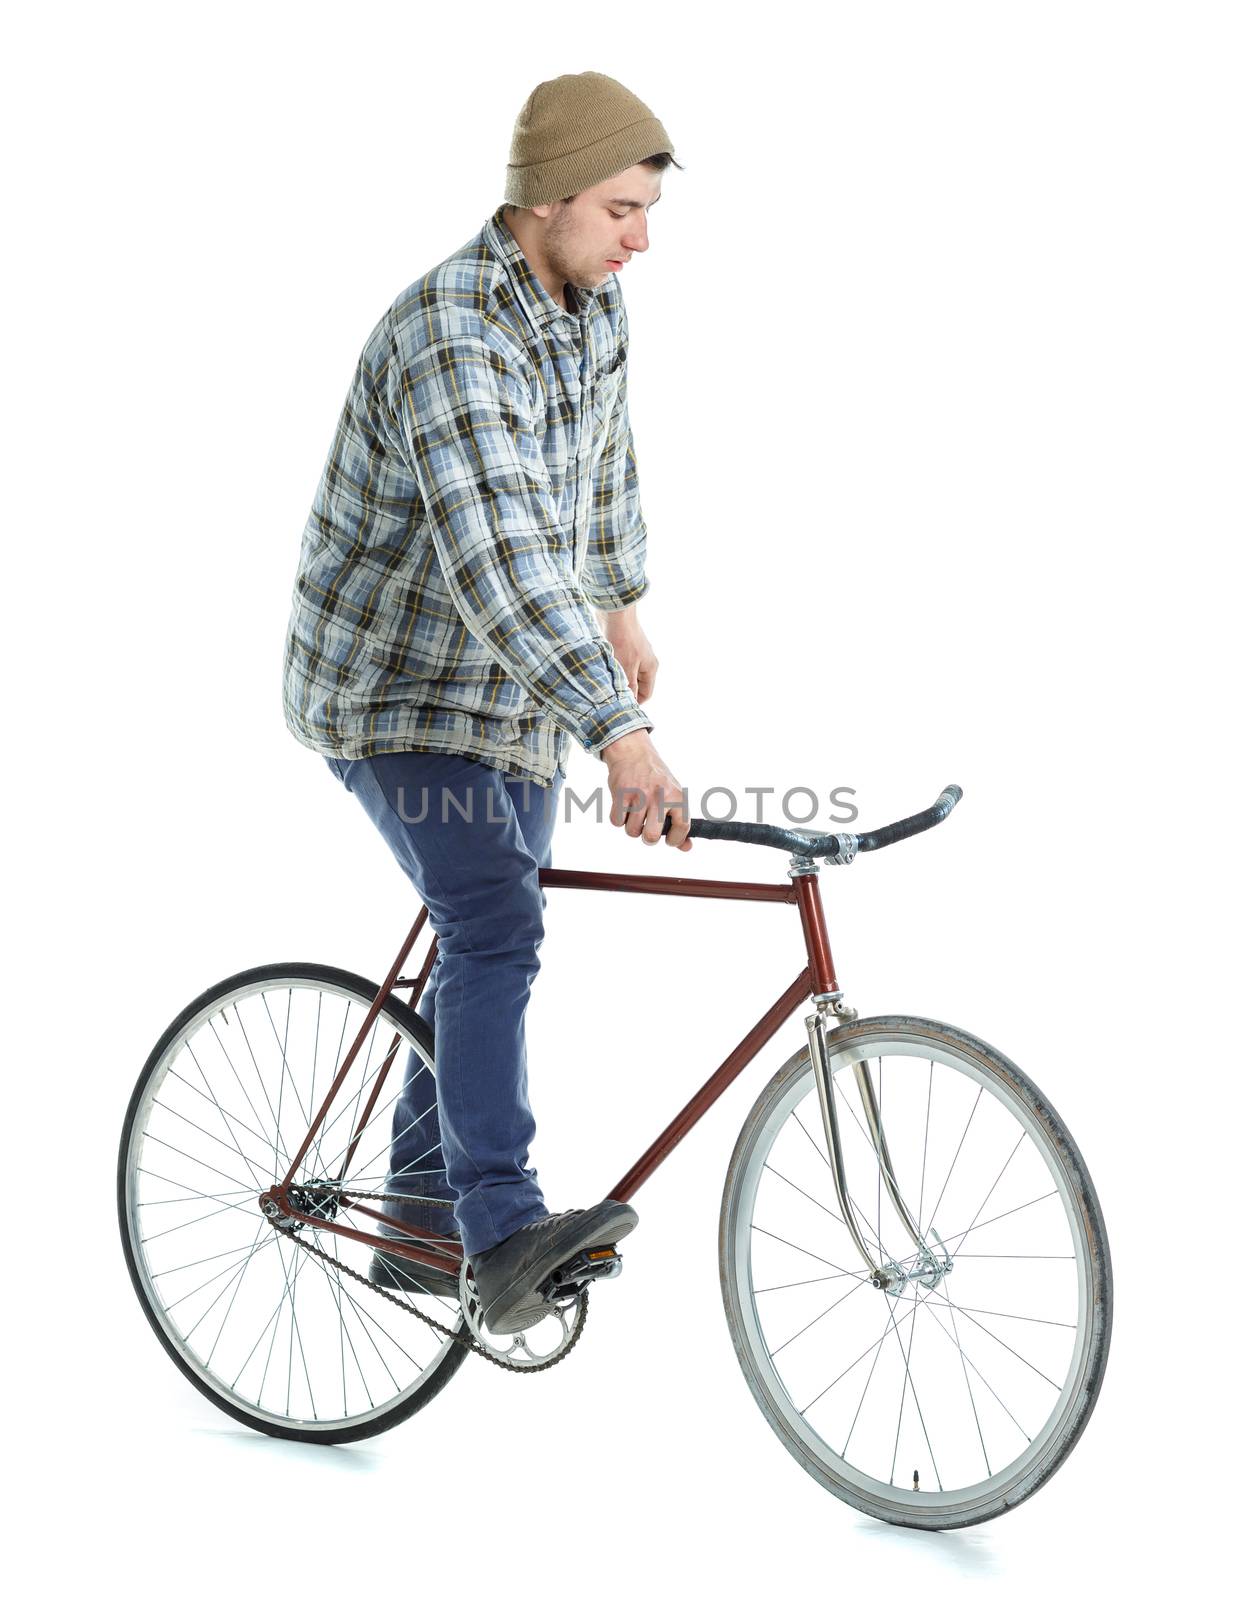 Young man doing tricks on fixed gear bicycle on a white by vlad_star